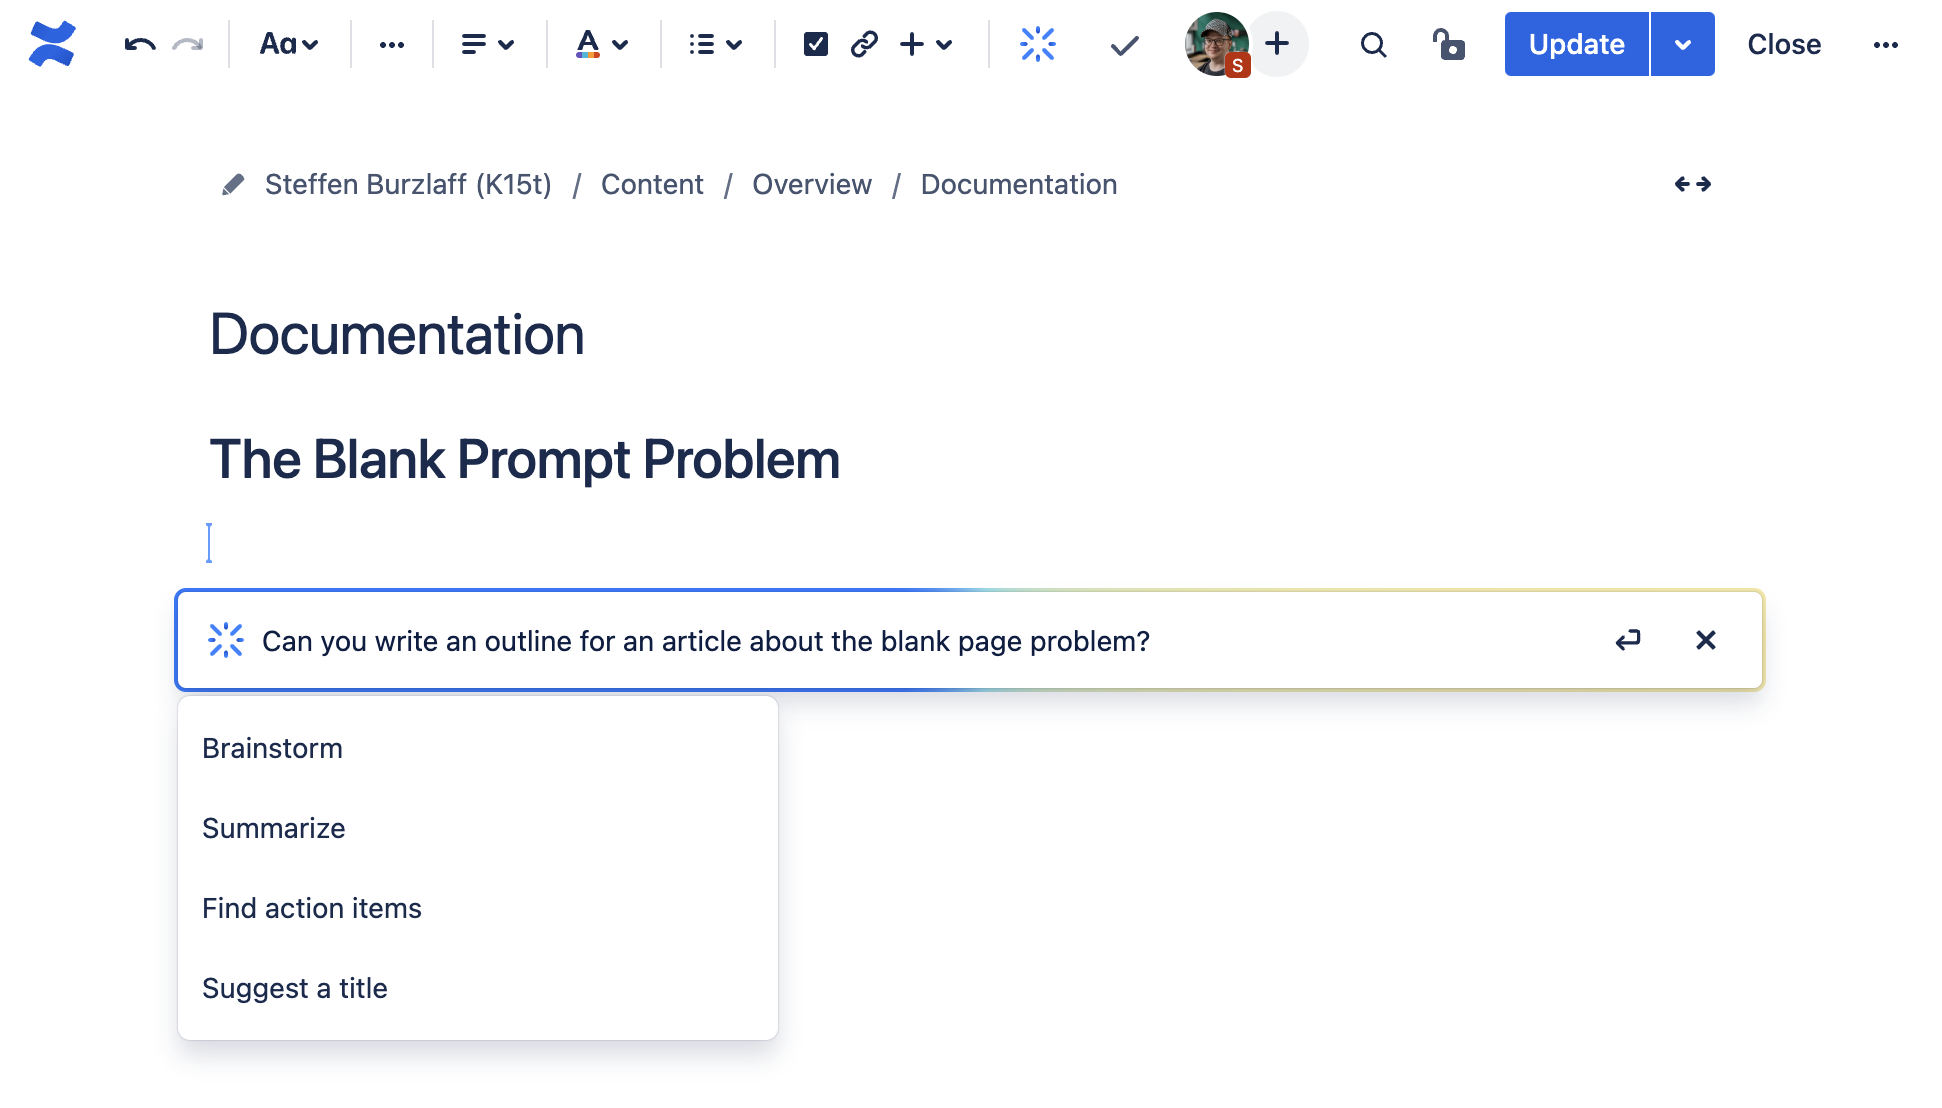 Asking Atlassian Intelligence for an outline about the blank page problem.